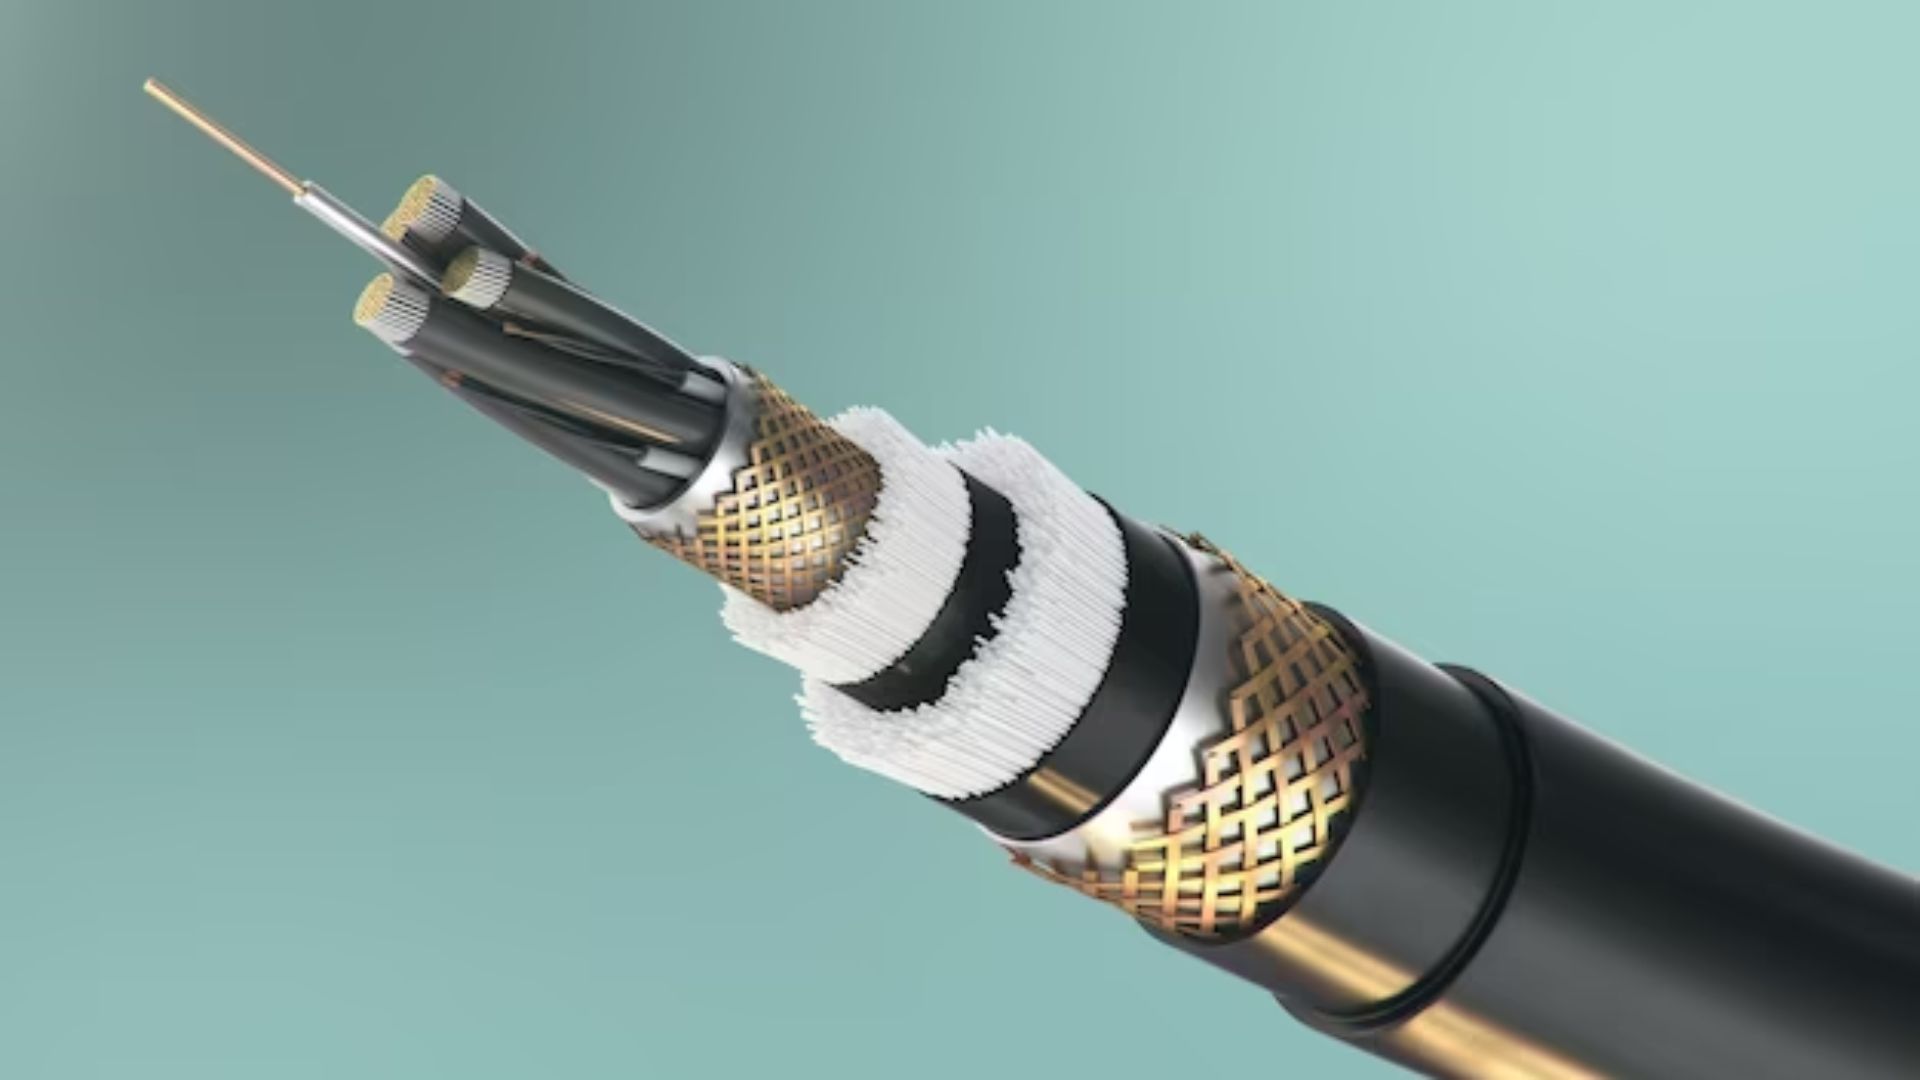 75-ohm coaxial cable with f-type connectors